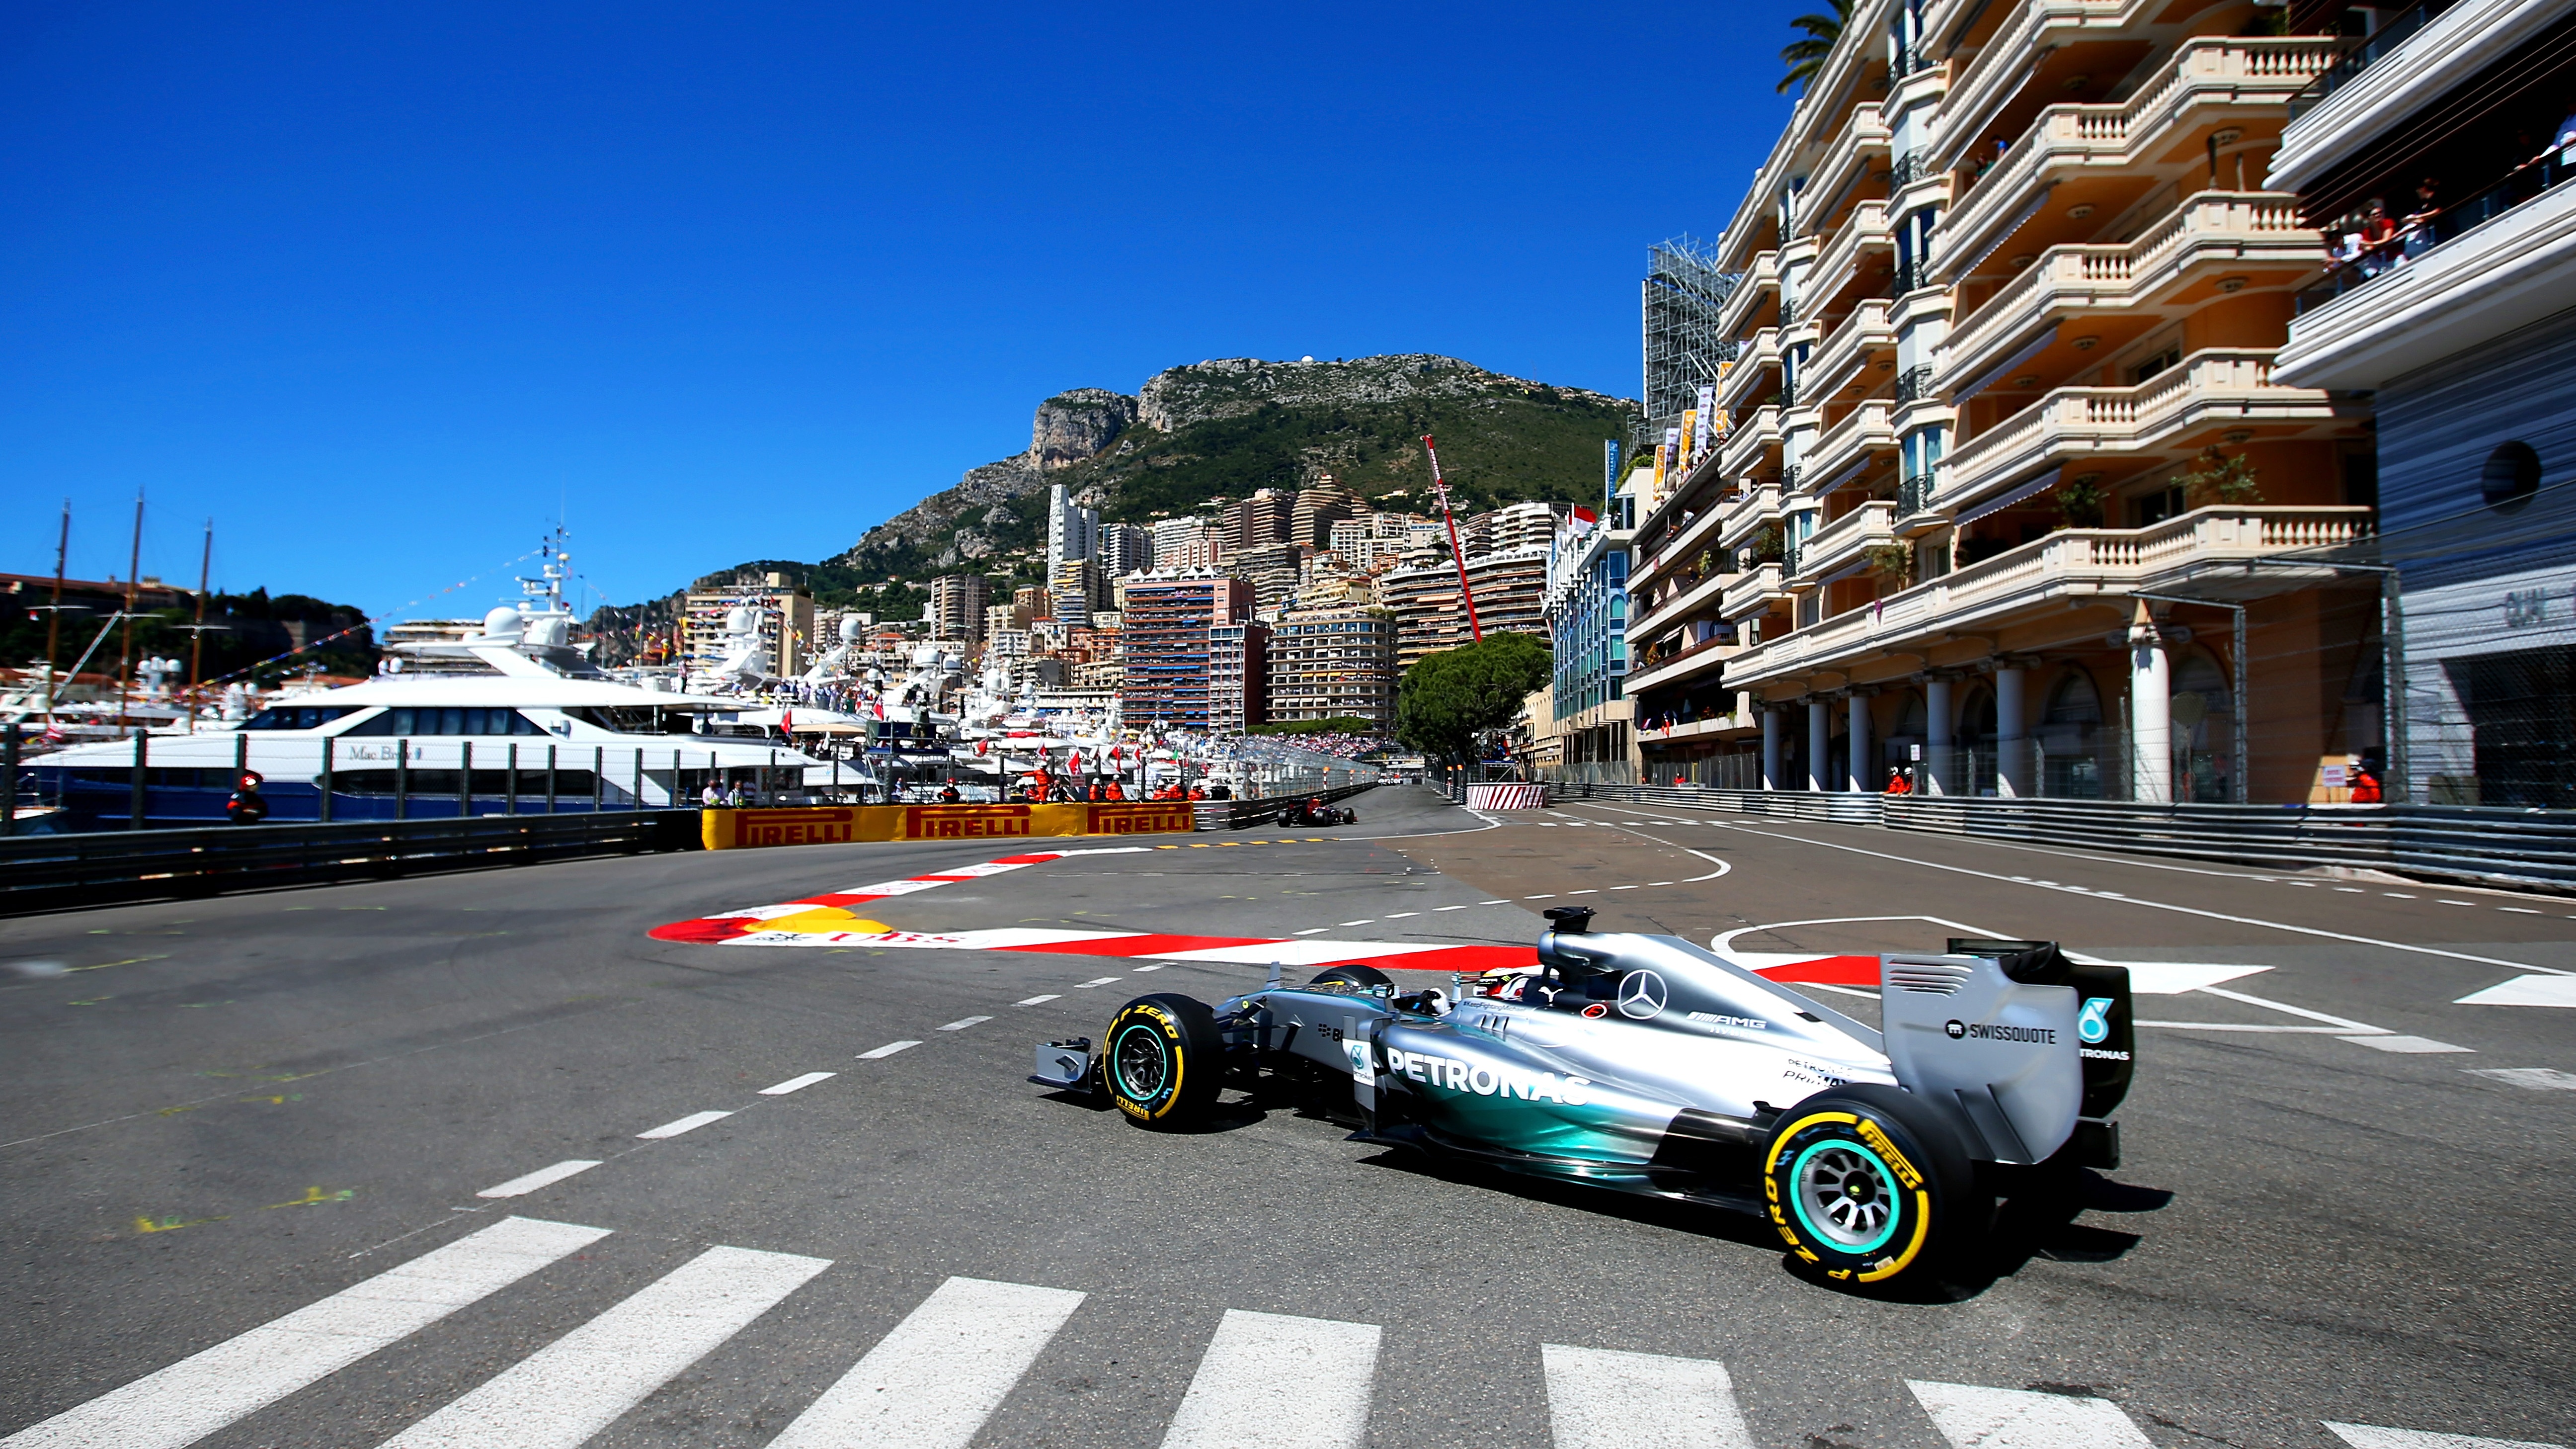 Monaco Grand Prix live stream how to watch F1 online from anywhere, Qualifying TechRadar